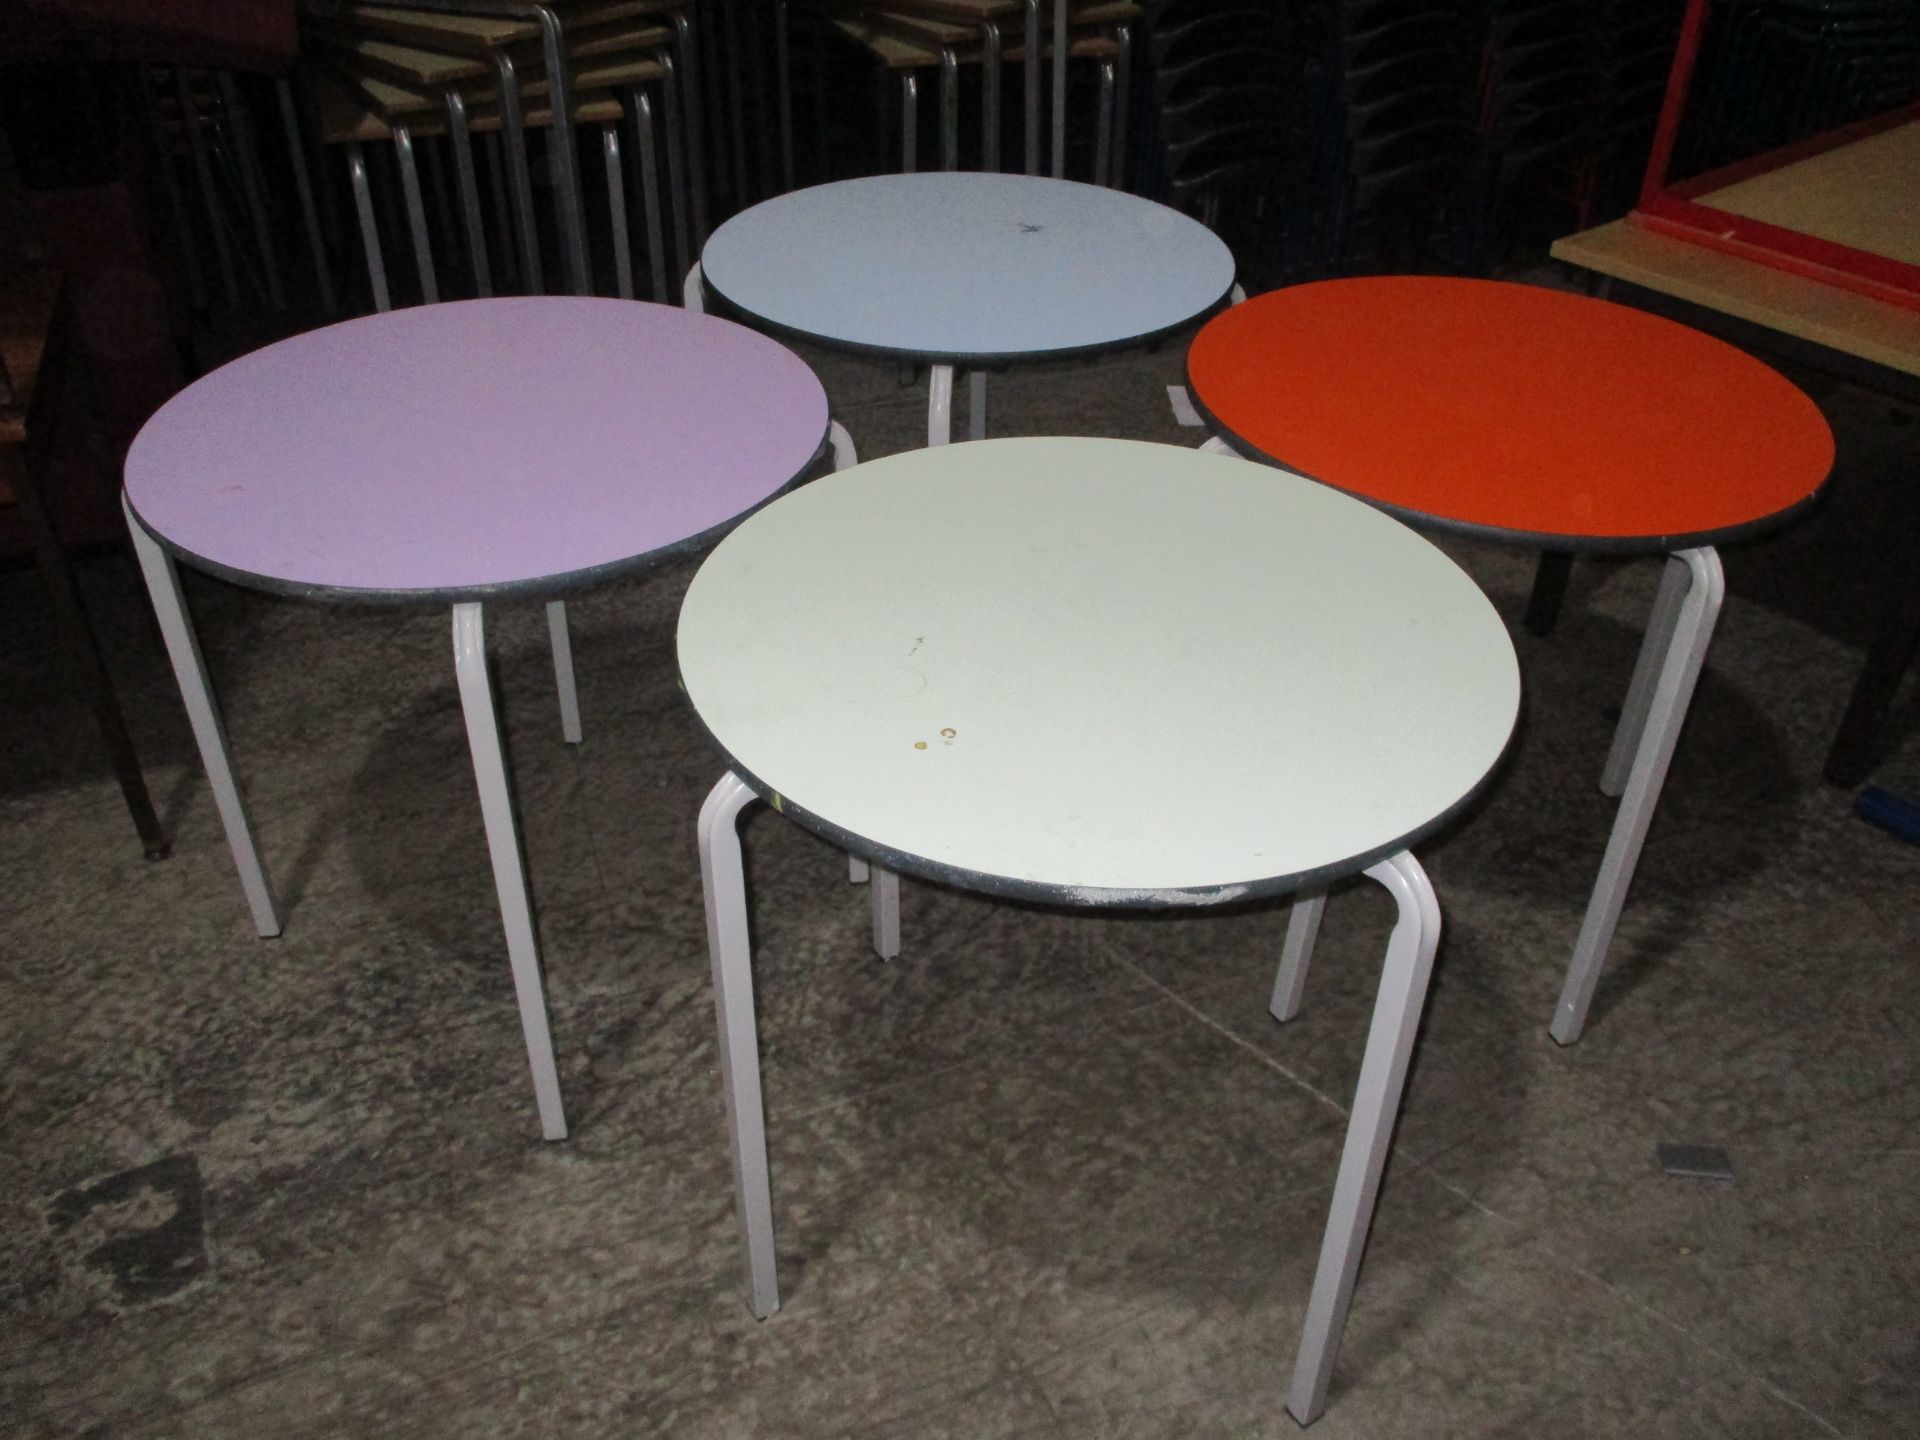 4 X Round Tables